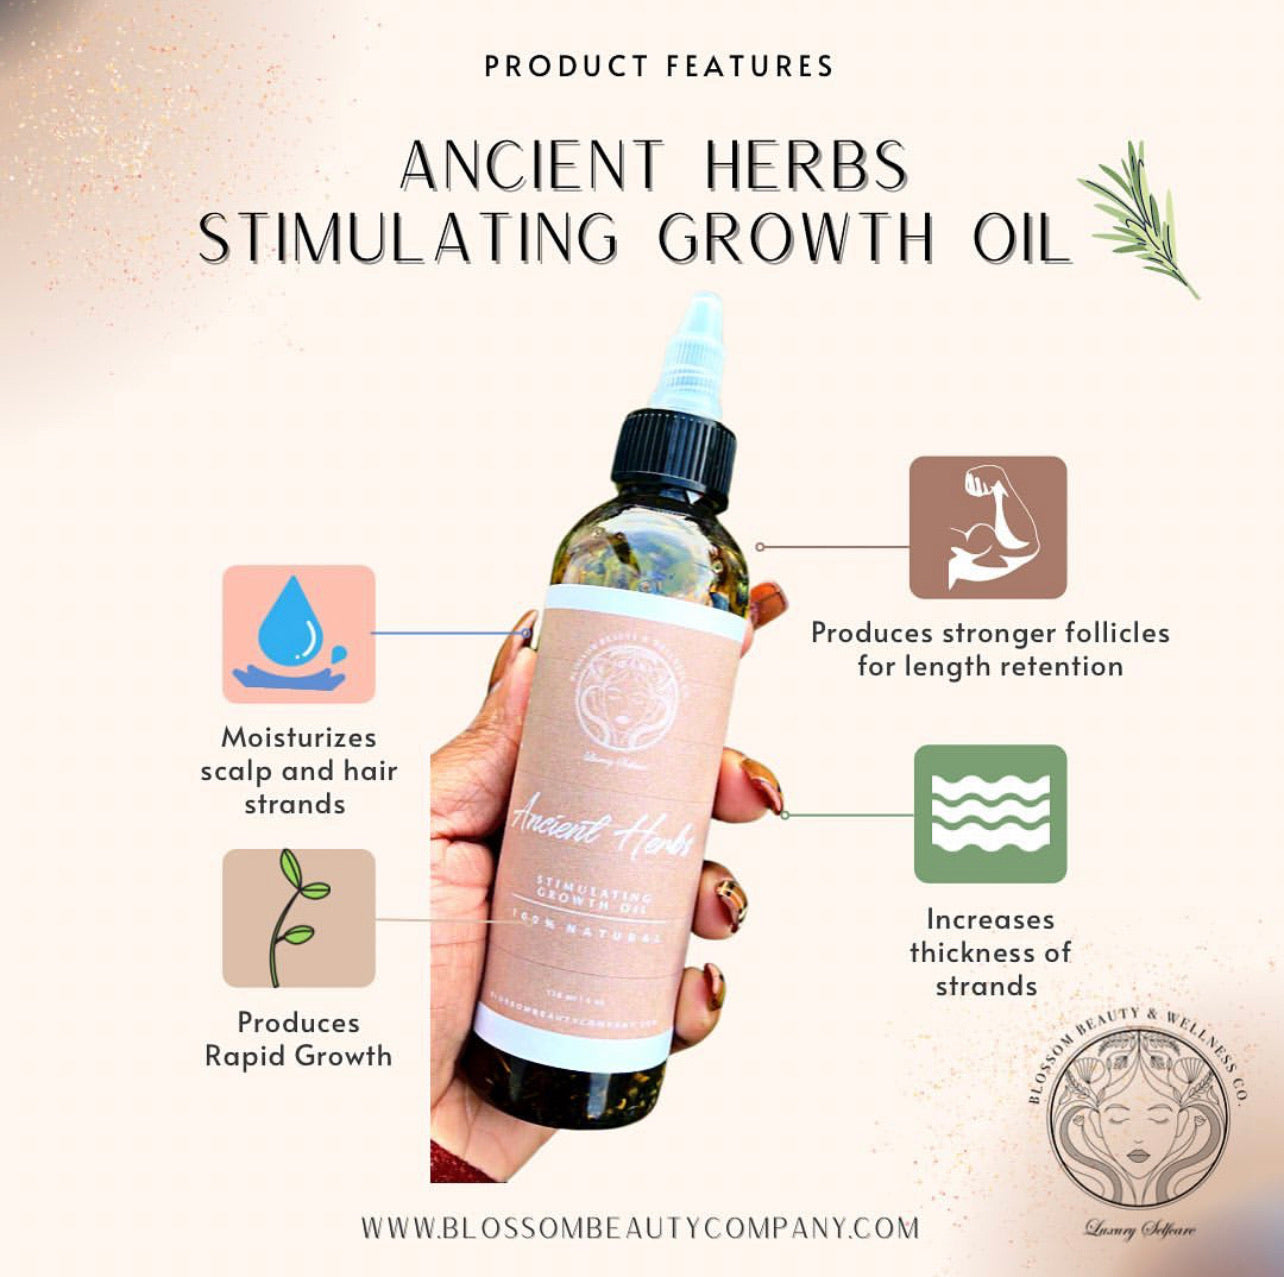 Ancient Herbs Stimulating Growth Oil